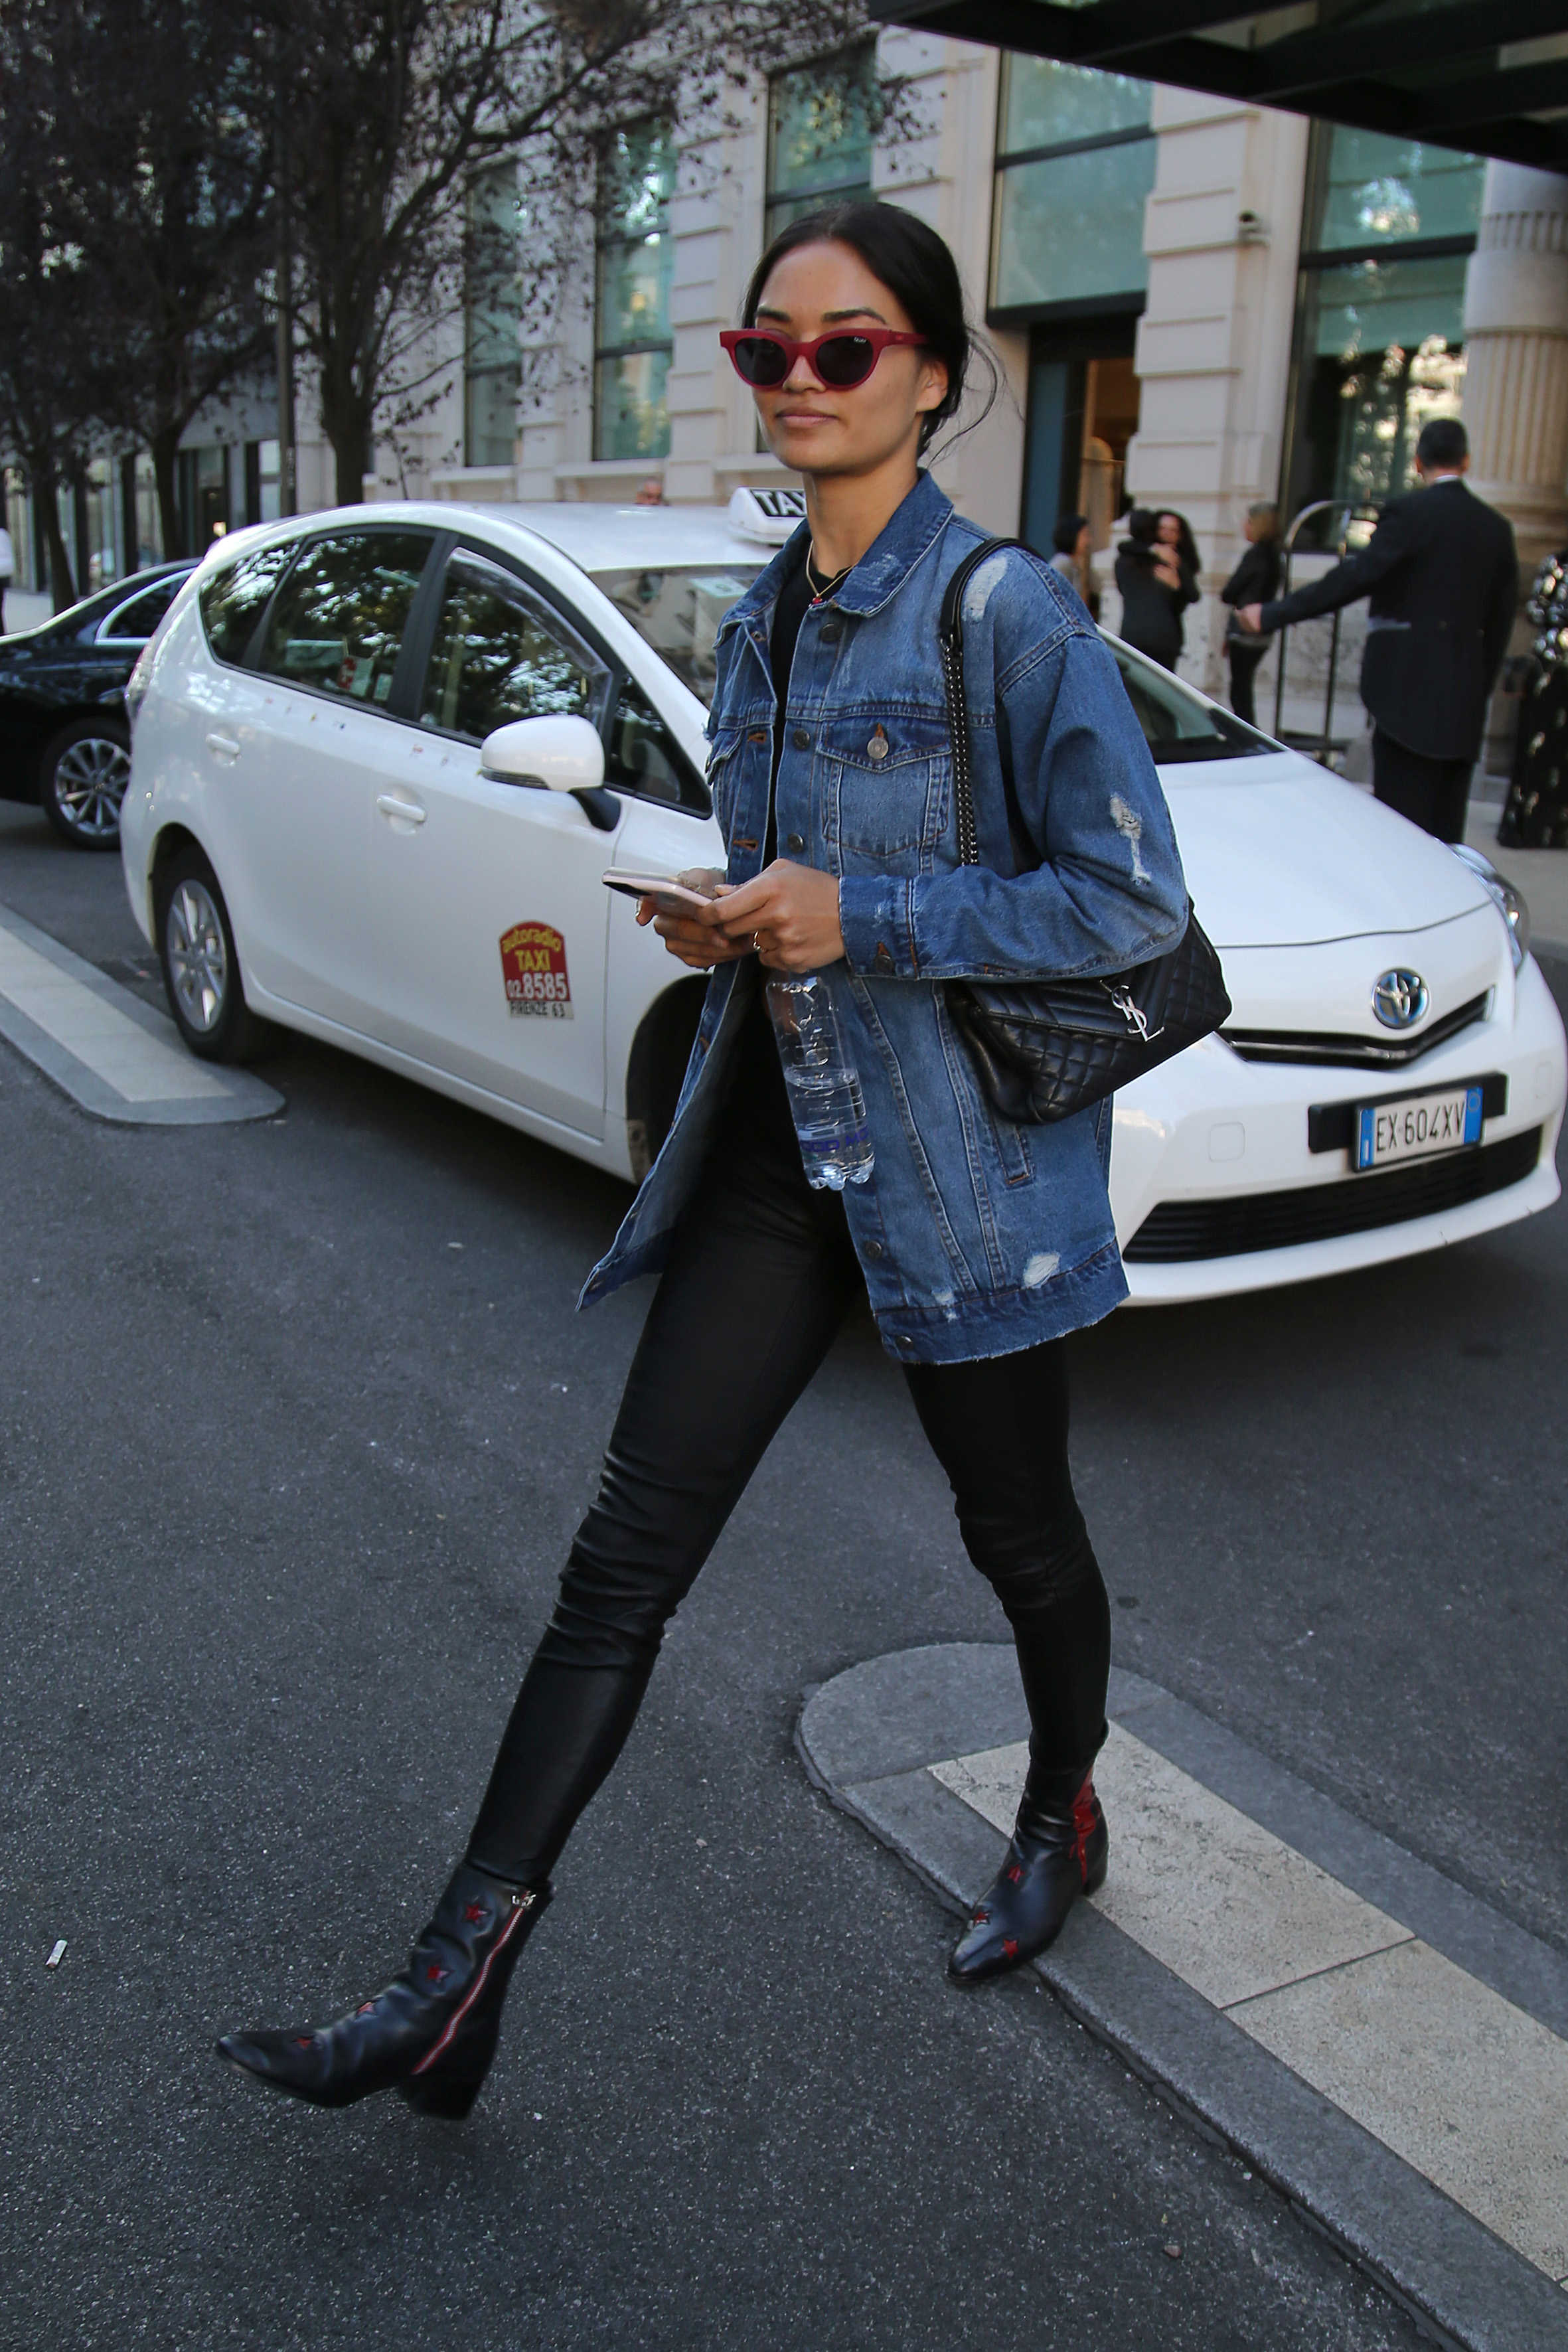 Shanina Shaik out & about in Milan